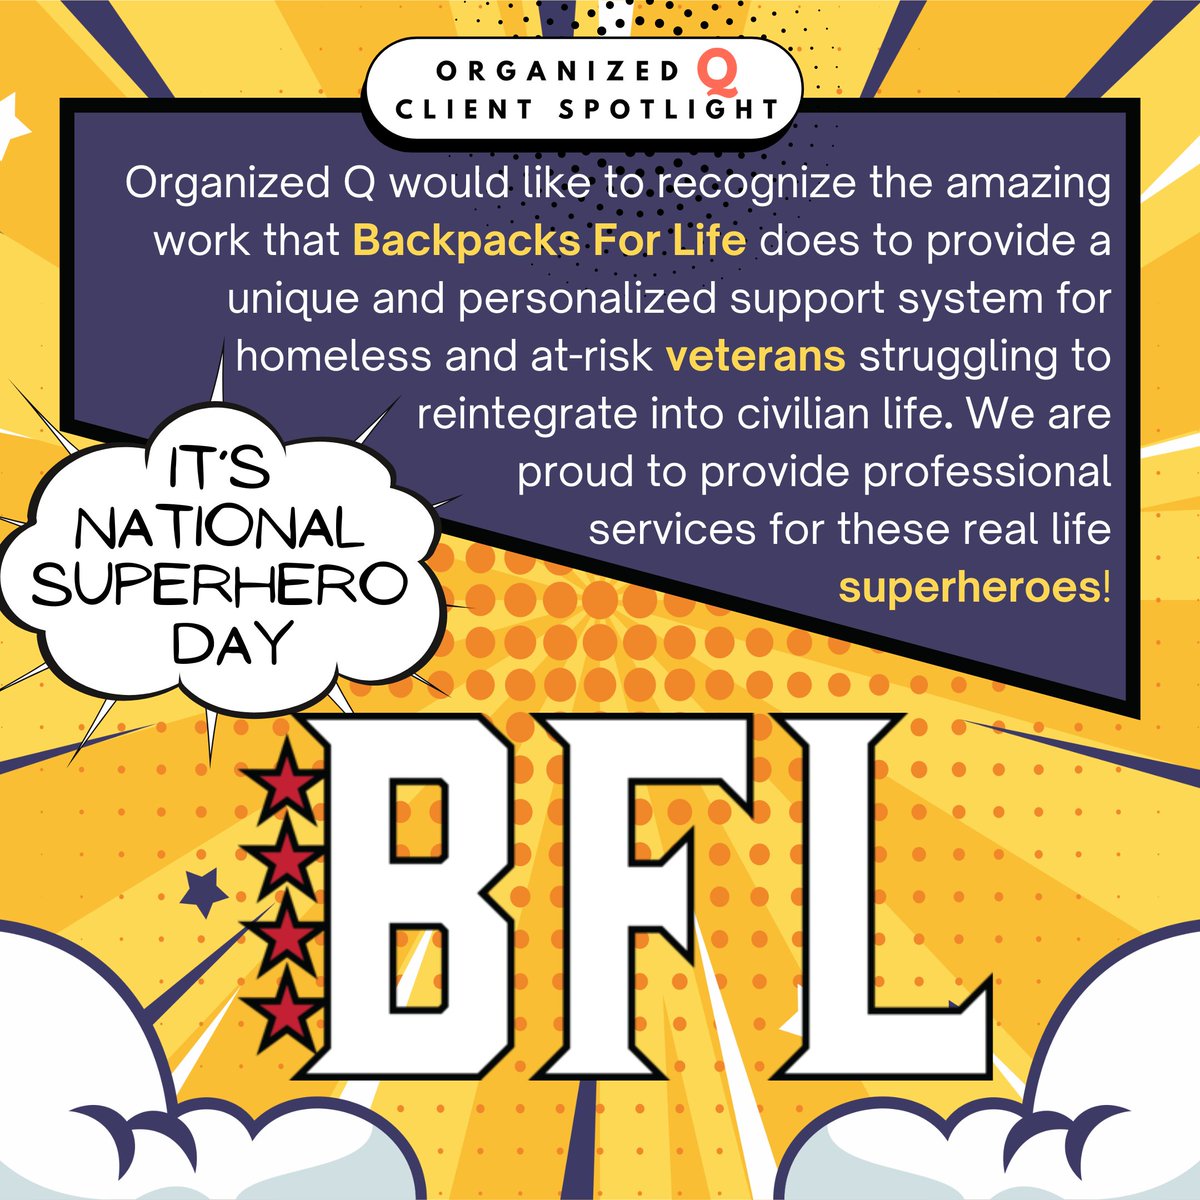 Not all superheroes wear capes. 
Some provide backpacks to homeless and at-risk #veterans.
This #NationalSuperheroDay we want to showcase one of the brands we provide a #VA to, @backpacksforlife, for the amazing work they do every day.
#ServingOurVeterans #VetsHelpingVets